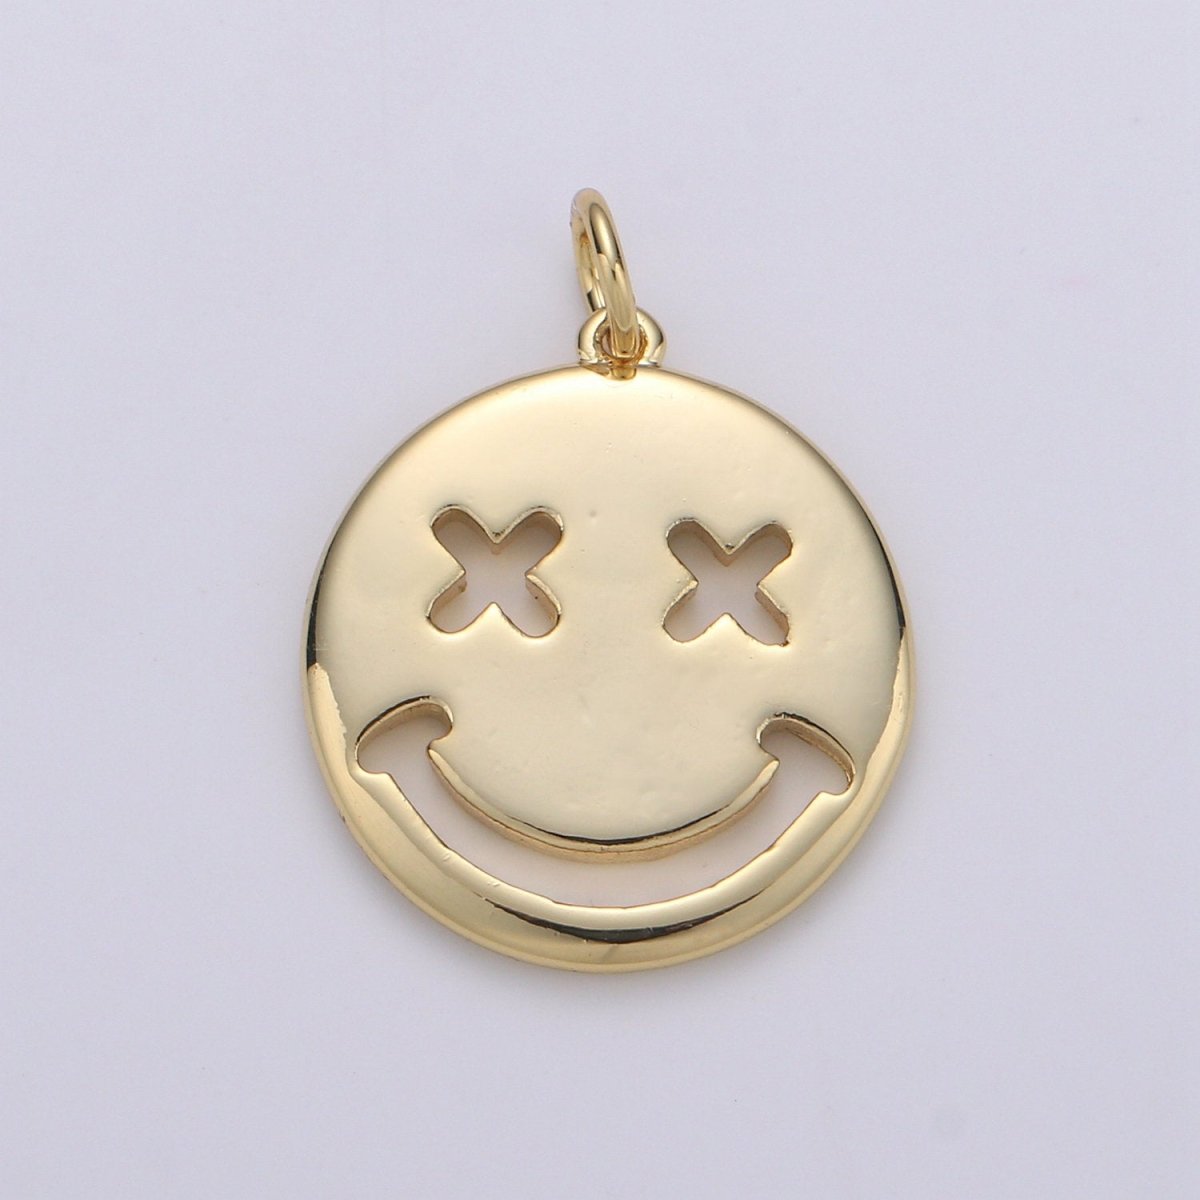 14K Gold Filled Happy Face Charm, emoji charm 24x18mm Gold Smile Charm Pendant Silver Smiley face charms Necklace Earring Bracelet Supply D-126 D-127 - DLUXCA